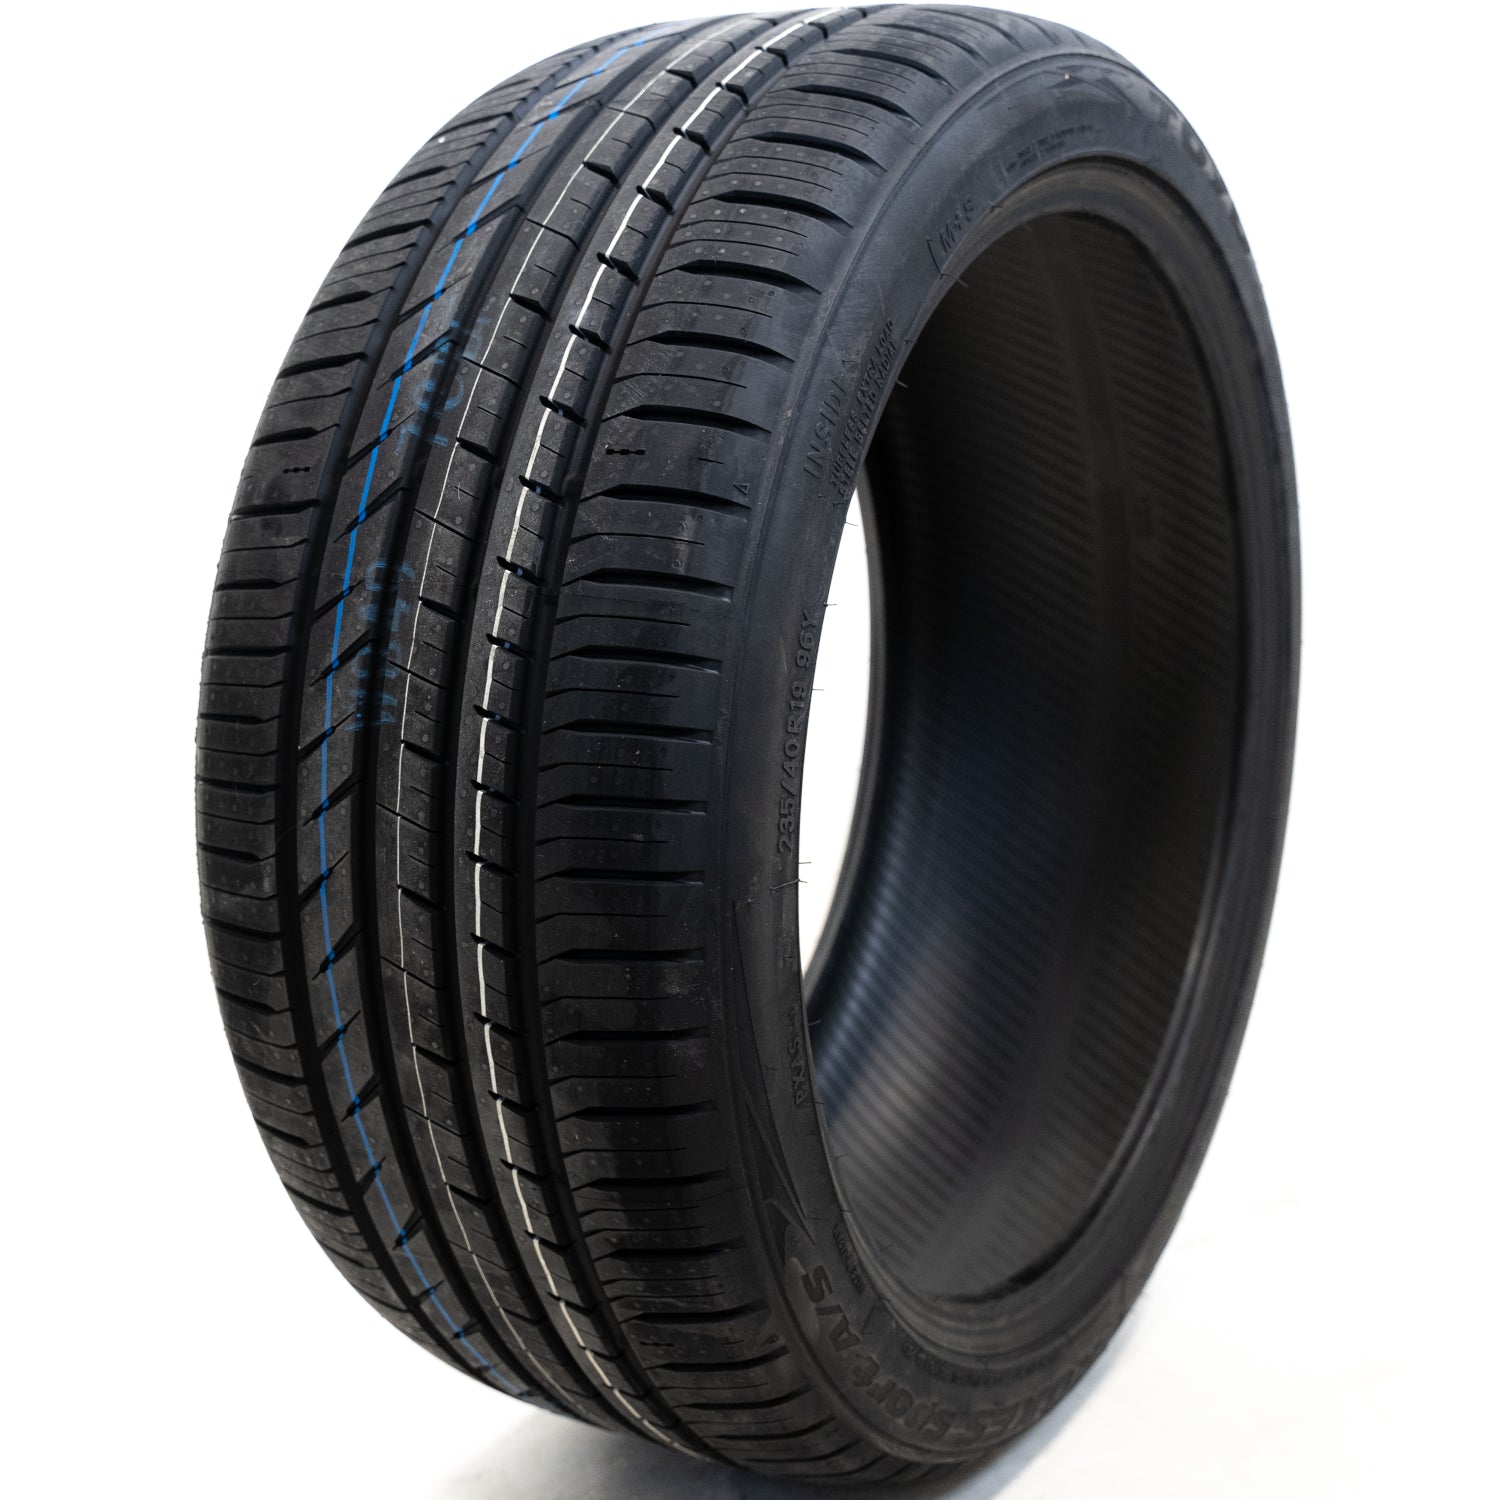 TOYO TIRES PROXES SPORT A/S 205/50R16XL (24.1X8.1R 16) Tires